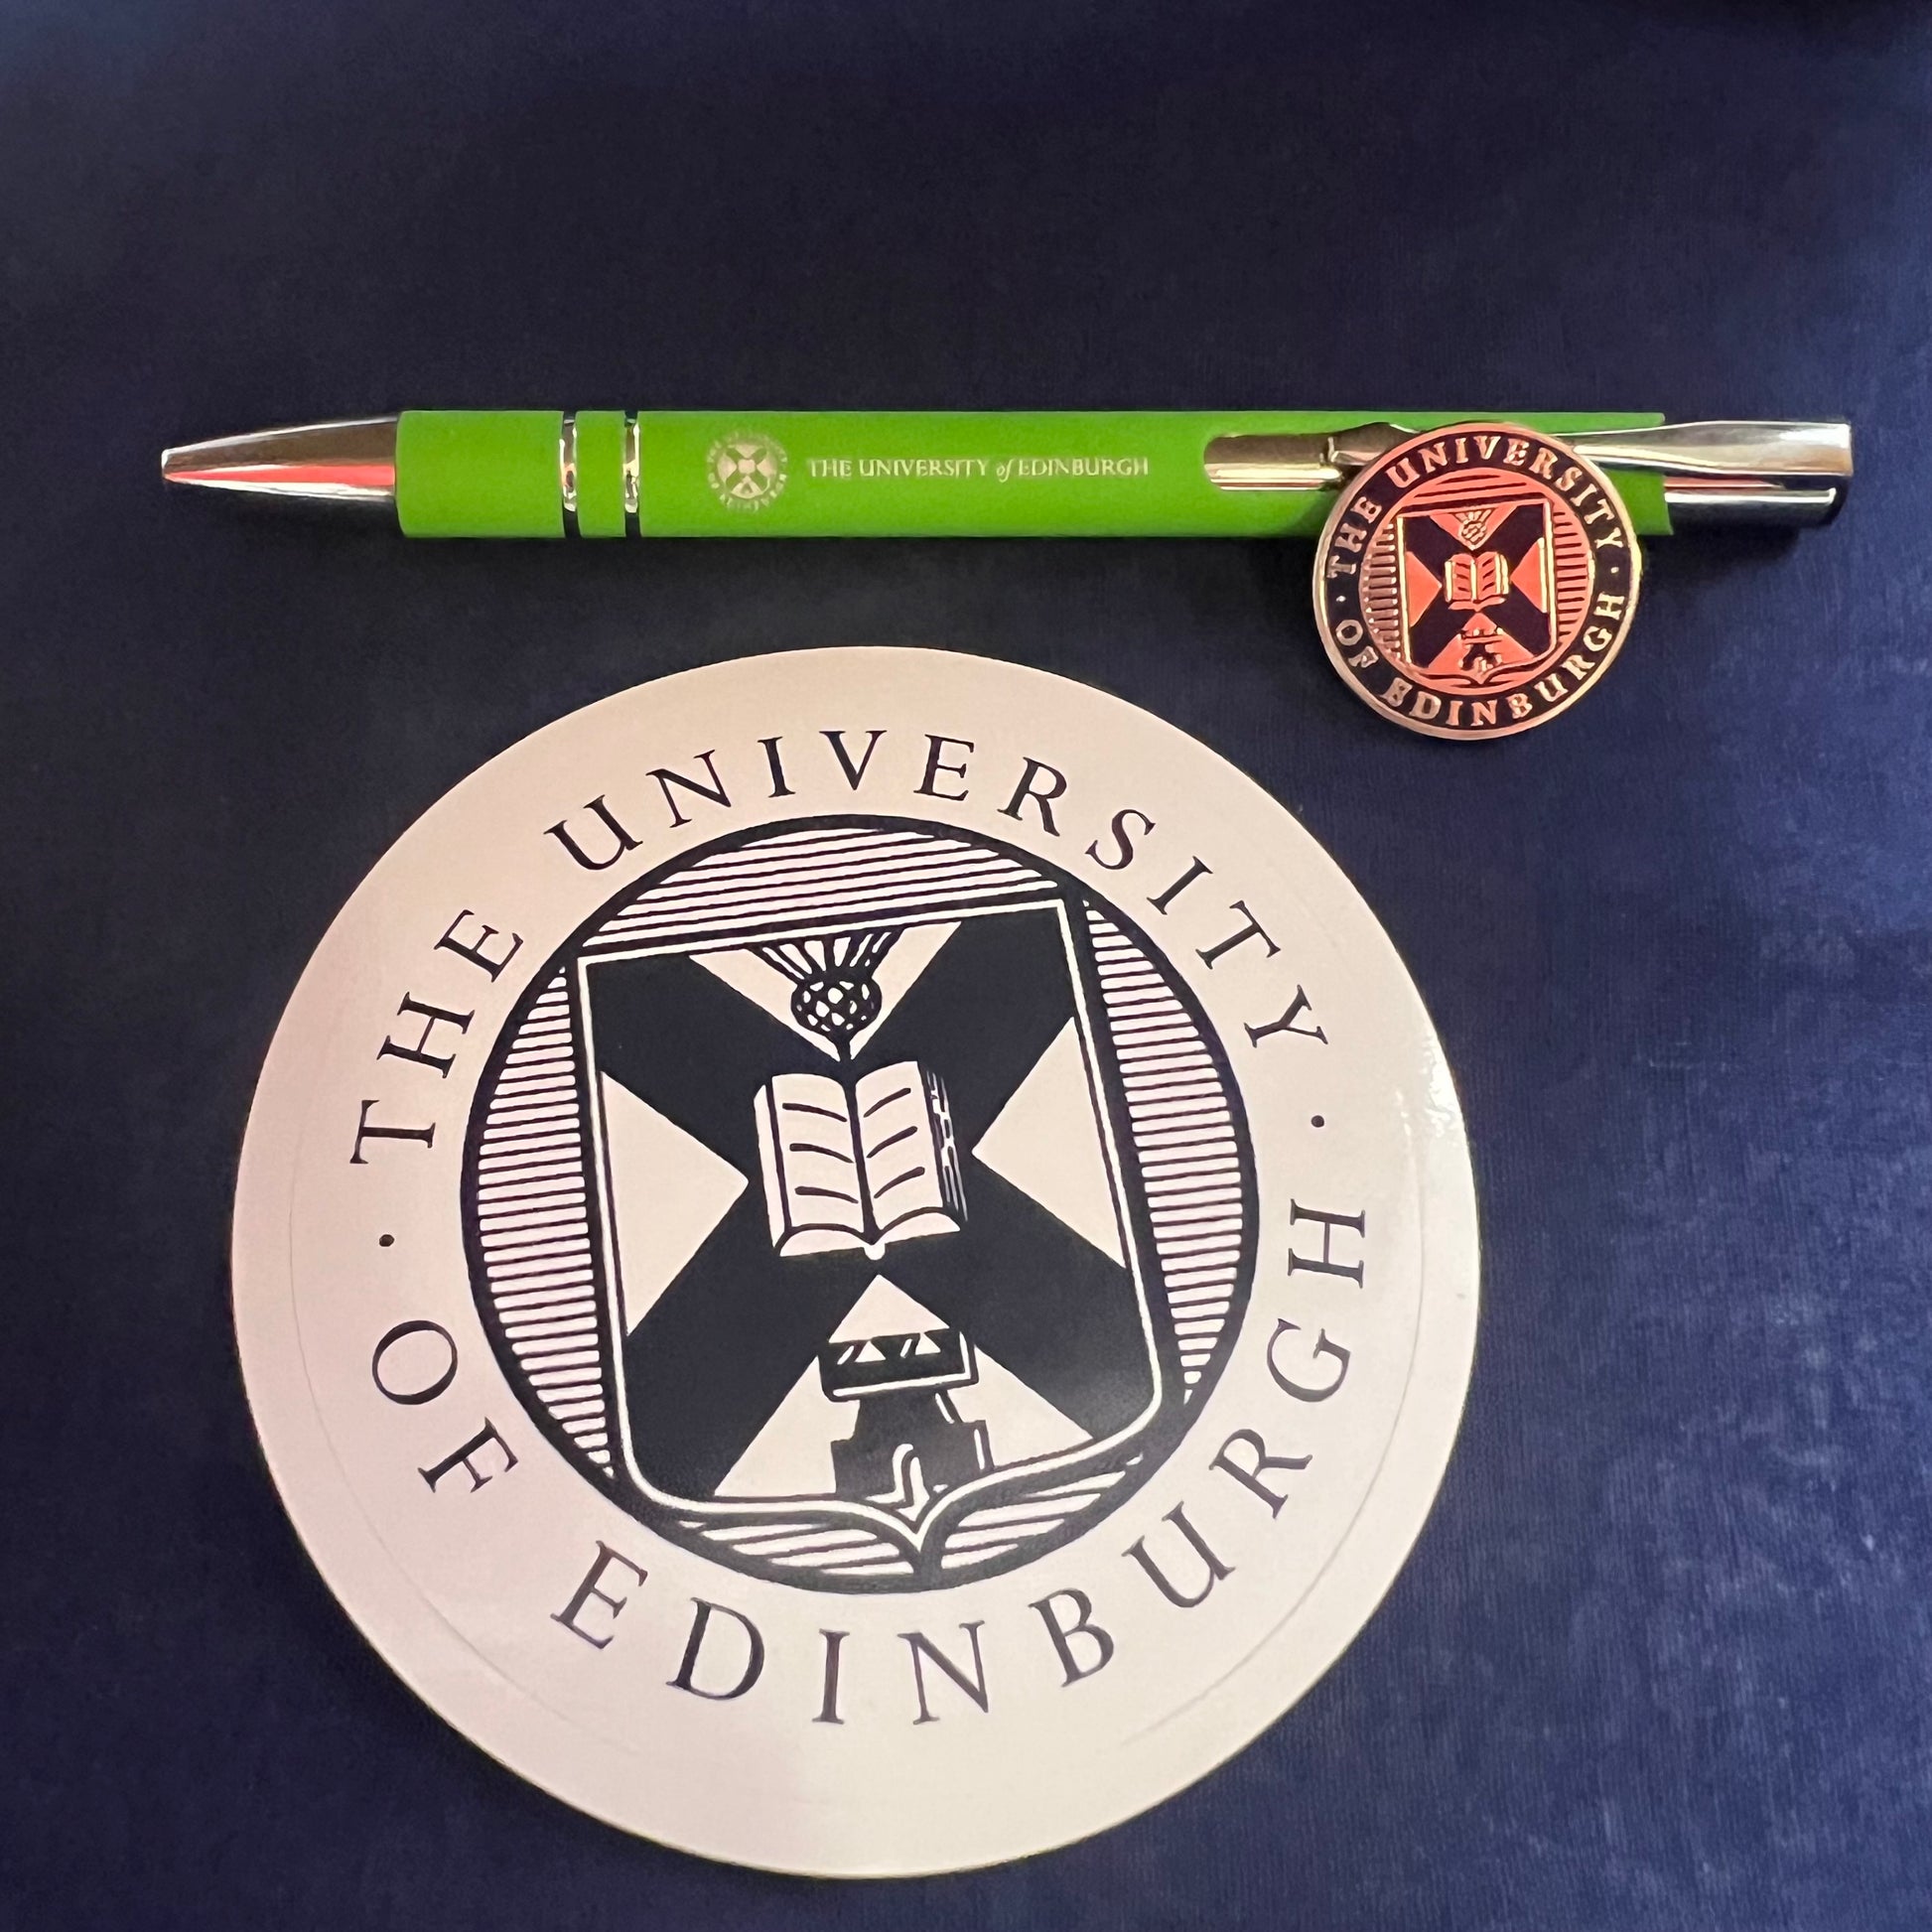 Green pen, navy and silver crest pin badge, navy and white university crest sticker